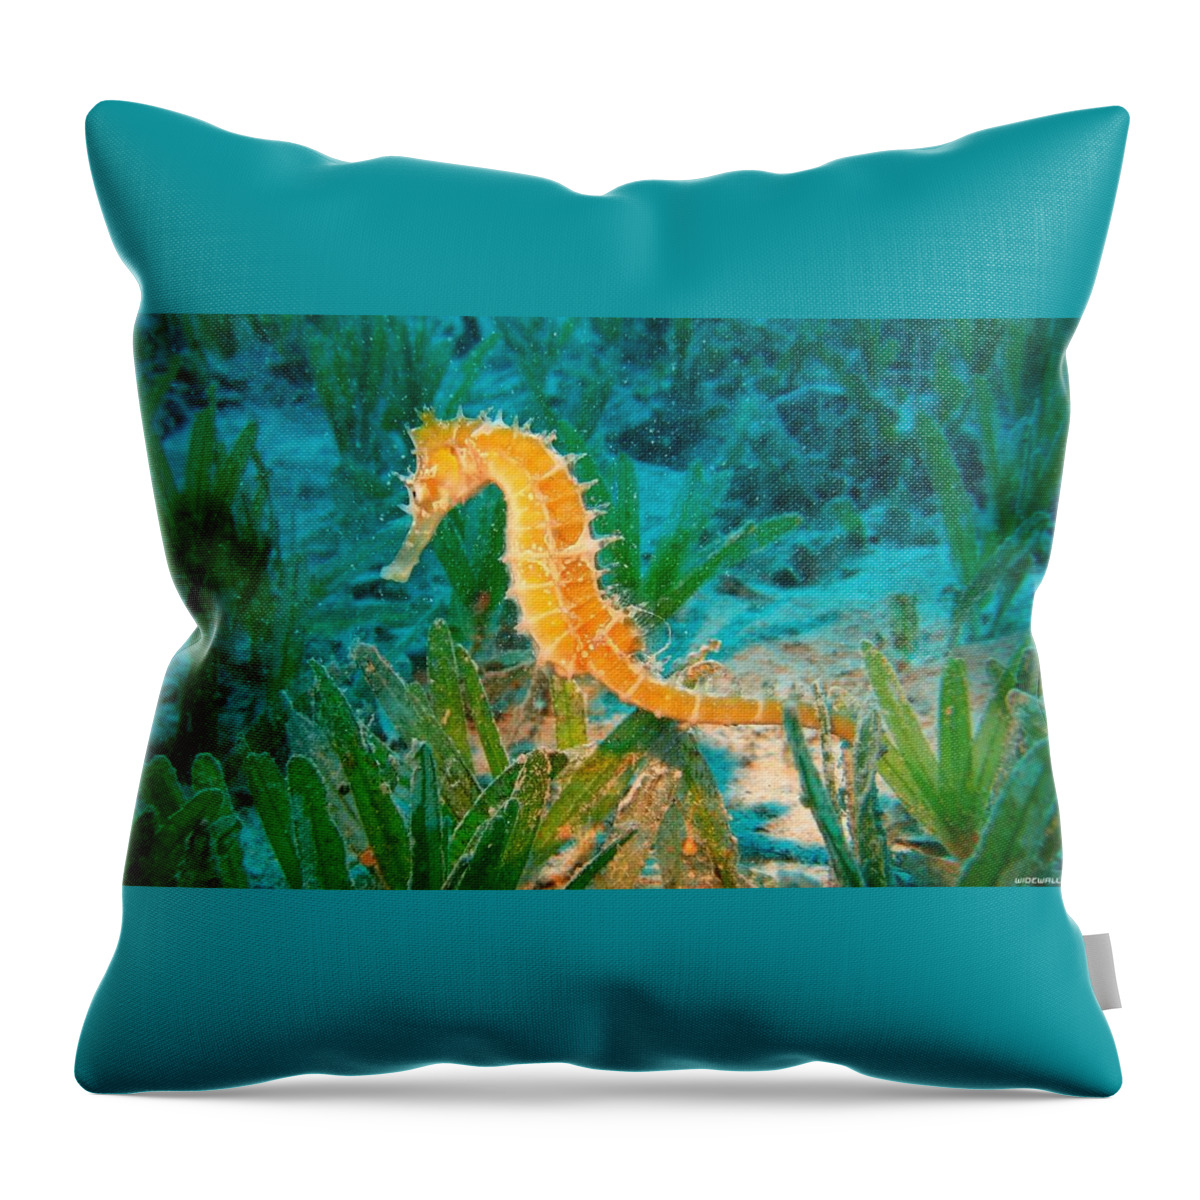 Seahorse Throw Pillow featuring the photograph Seahorse by Jackie Russo